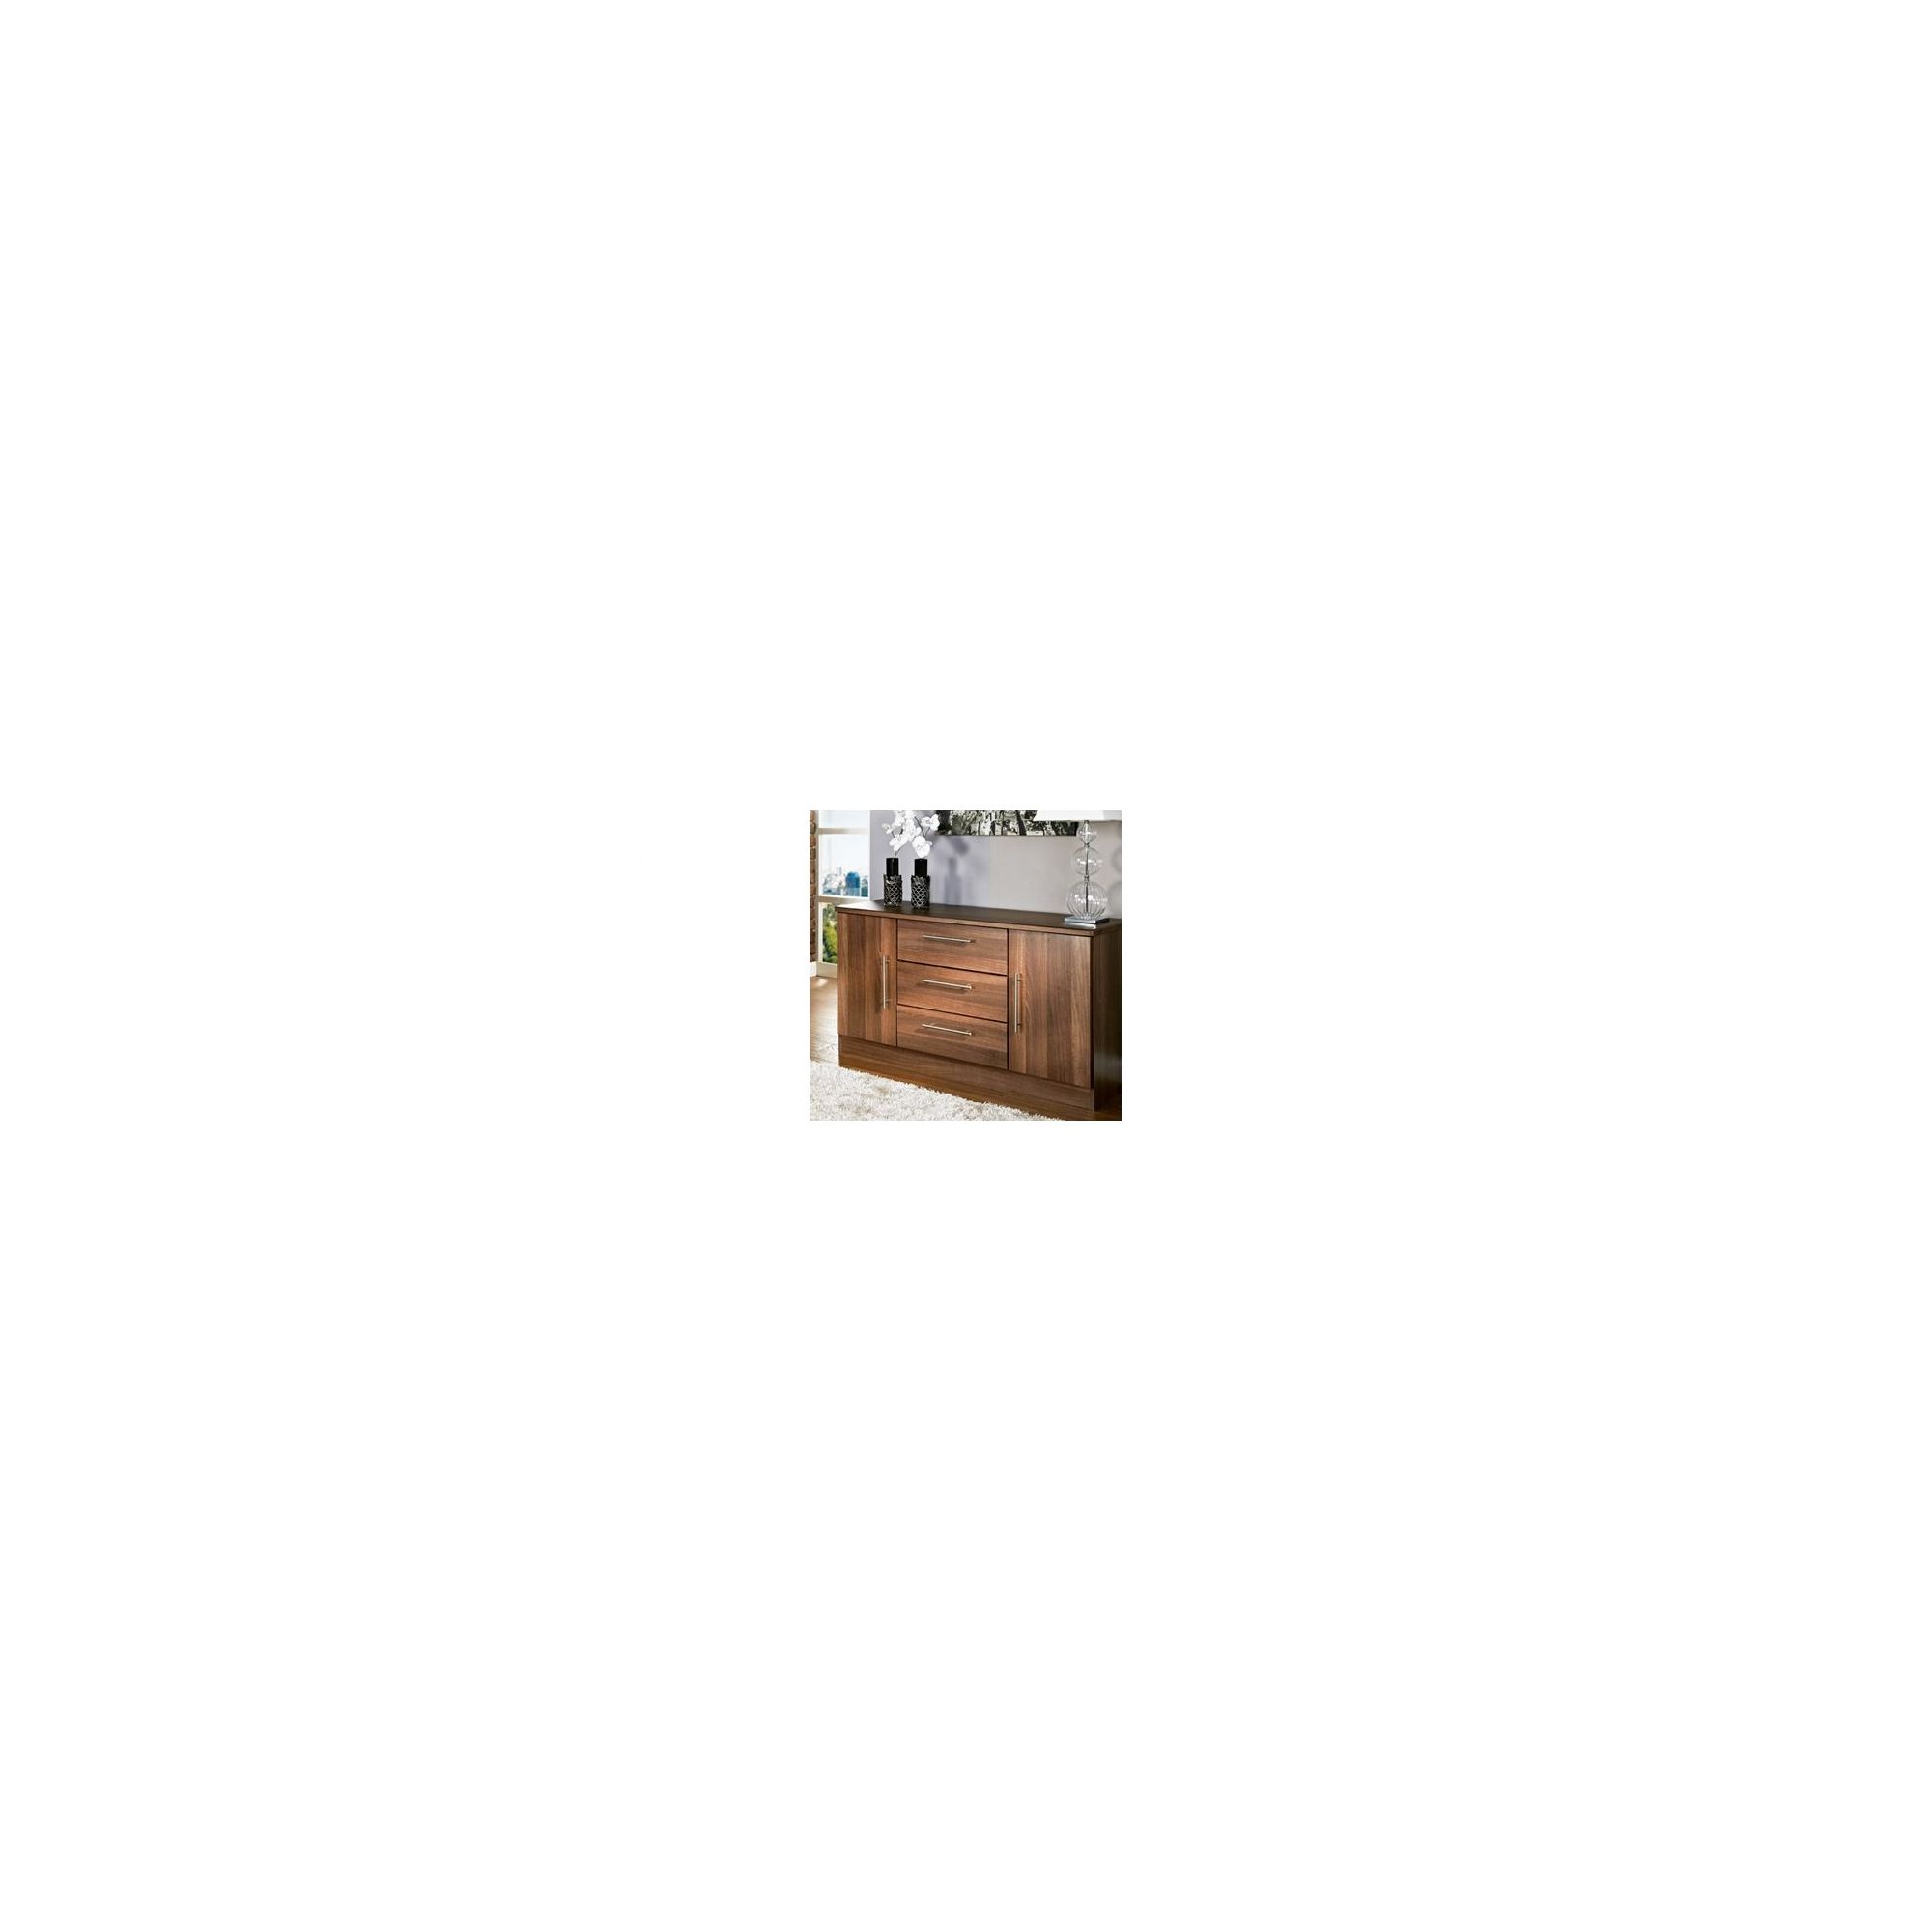 Welcome Furniture Living Room Wide 2 Door / 3 Drawer Unit - Noche at Tesco Direct